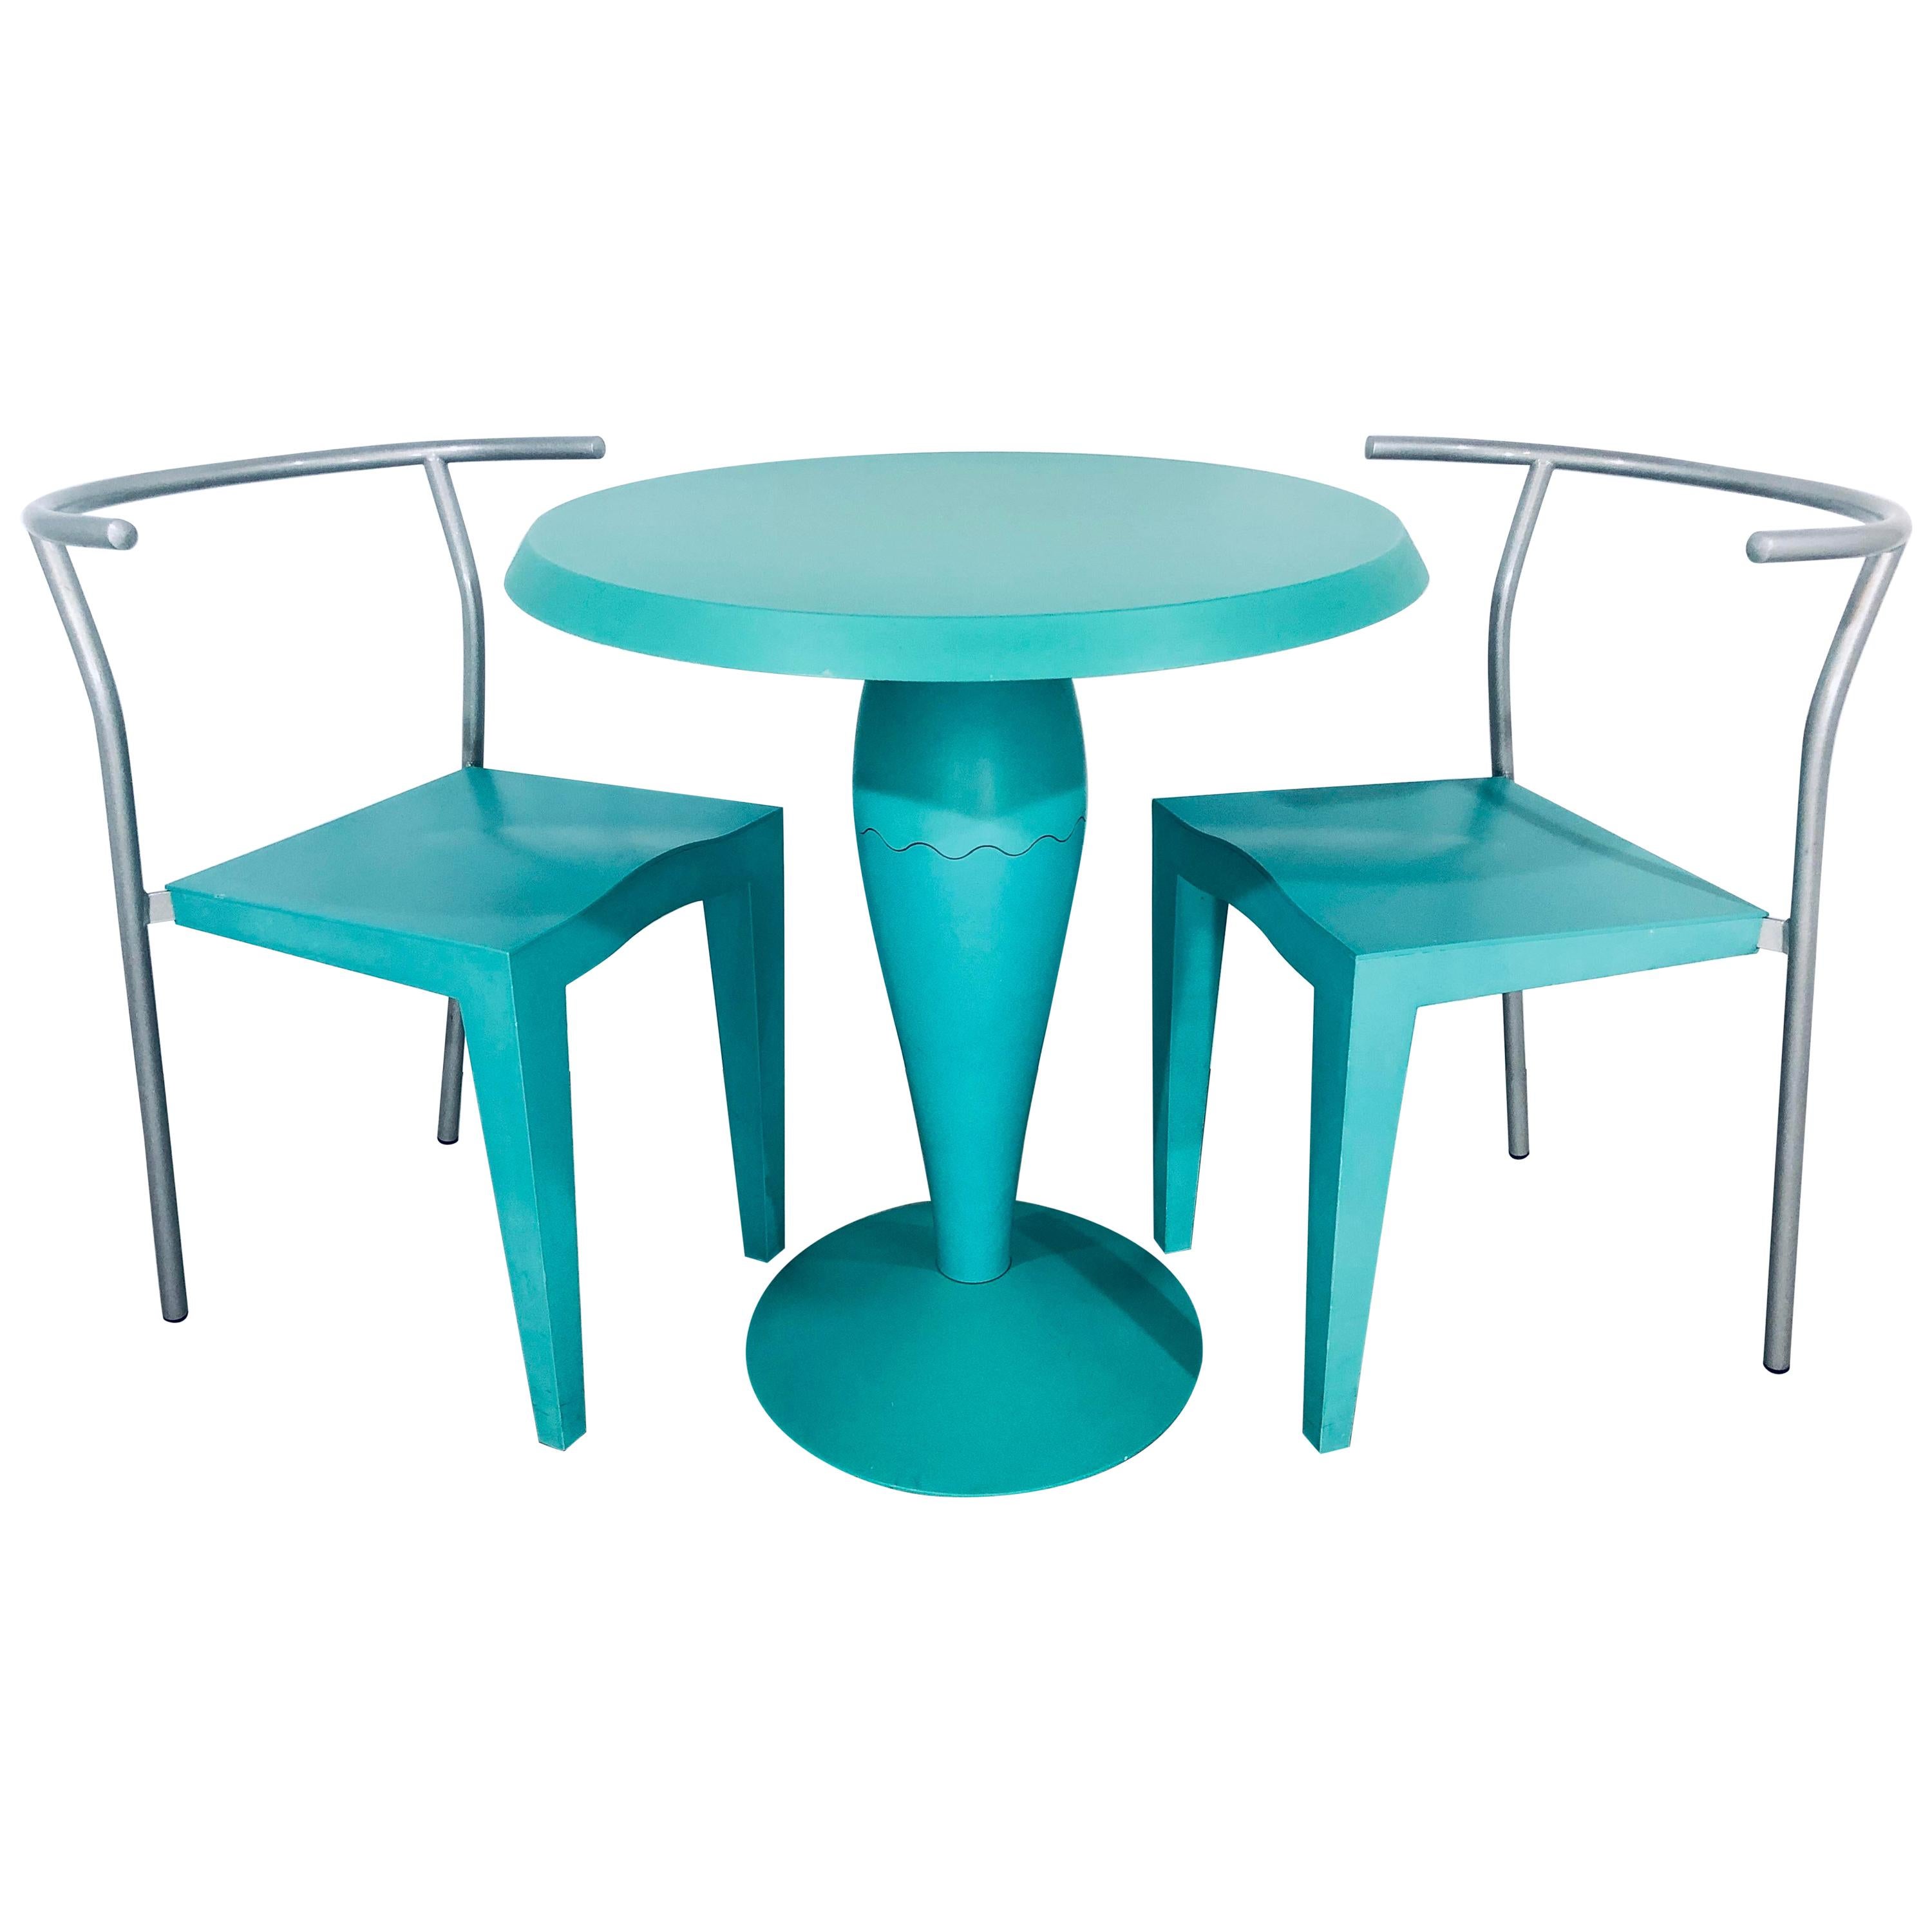 Philippe Starck for Kartell Mint Green Bistro Set, 3 Pieces